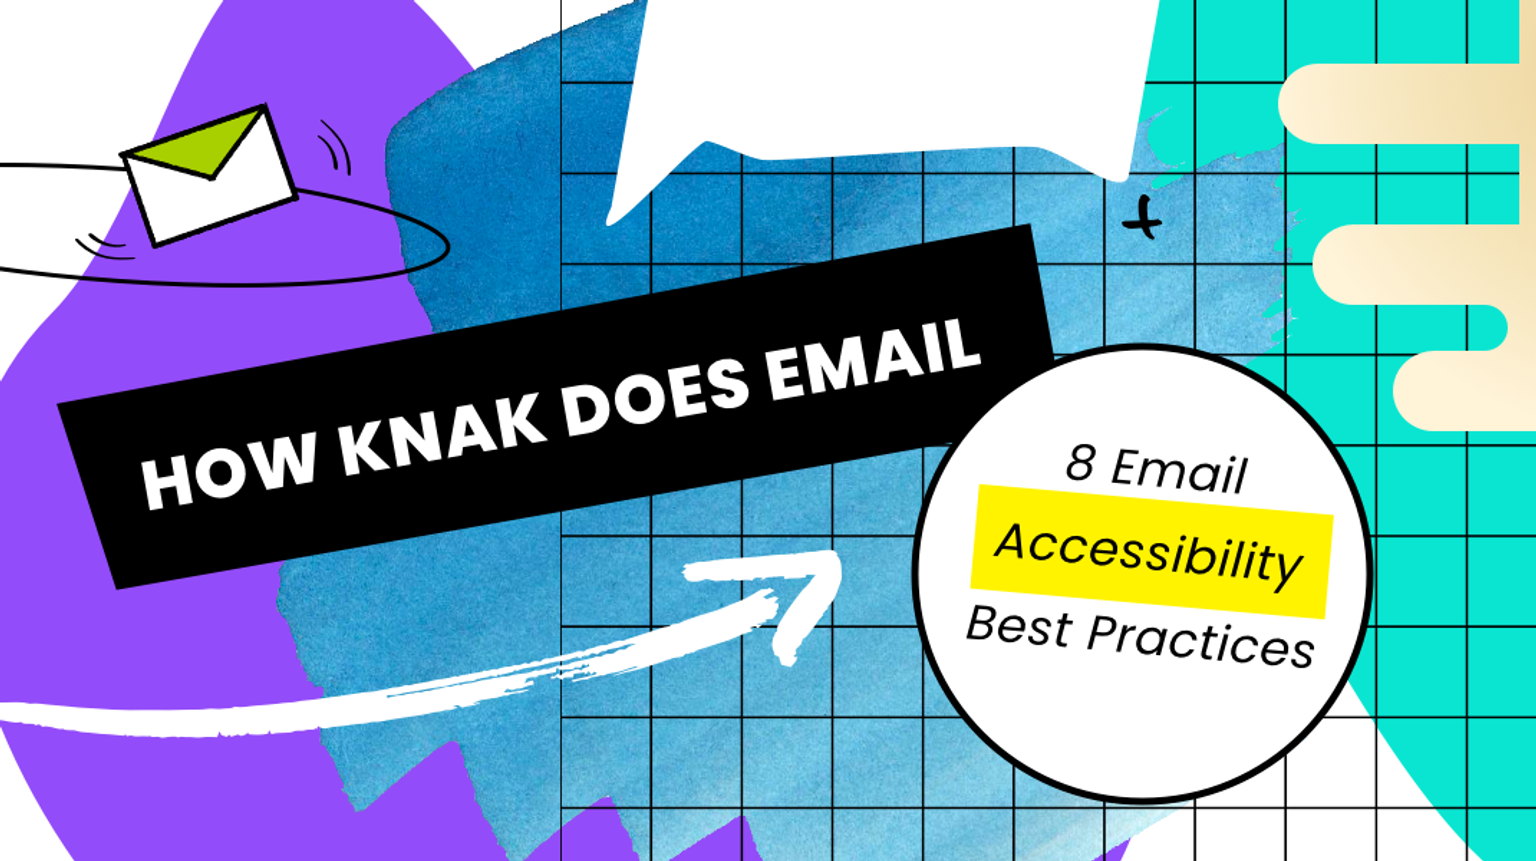 8 Email Accessibility Best Practices